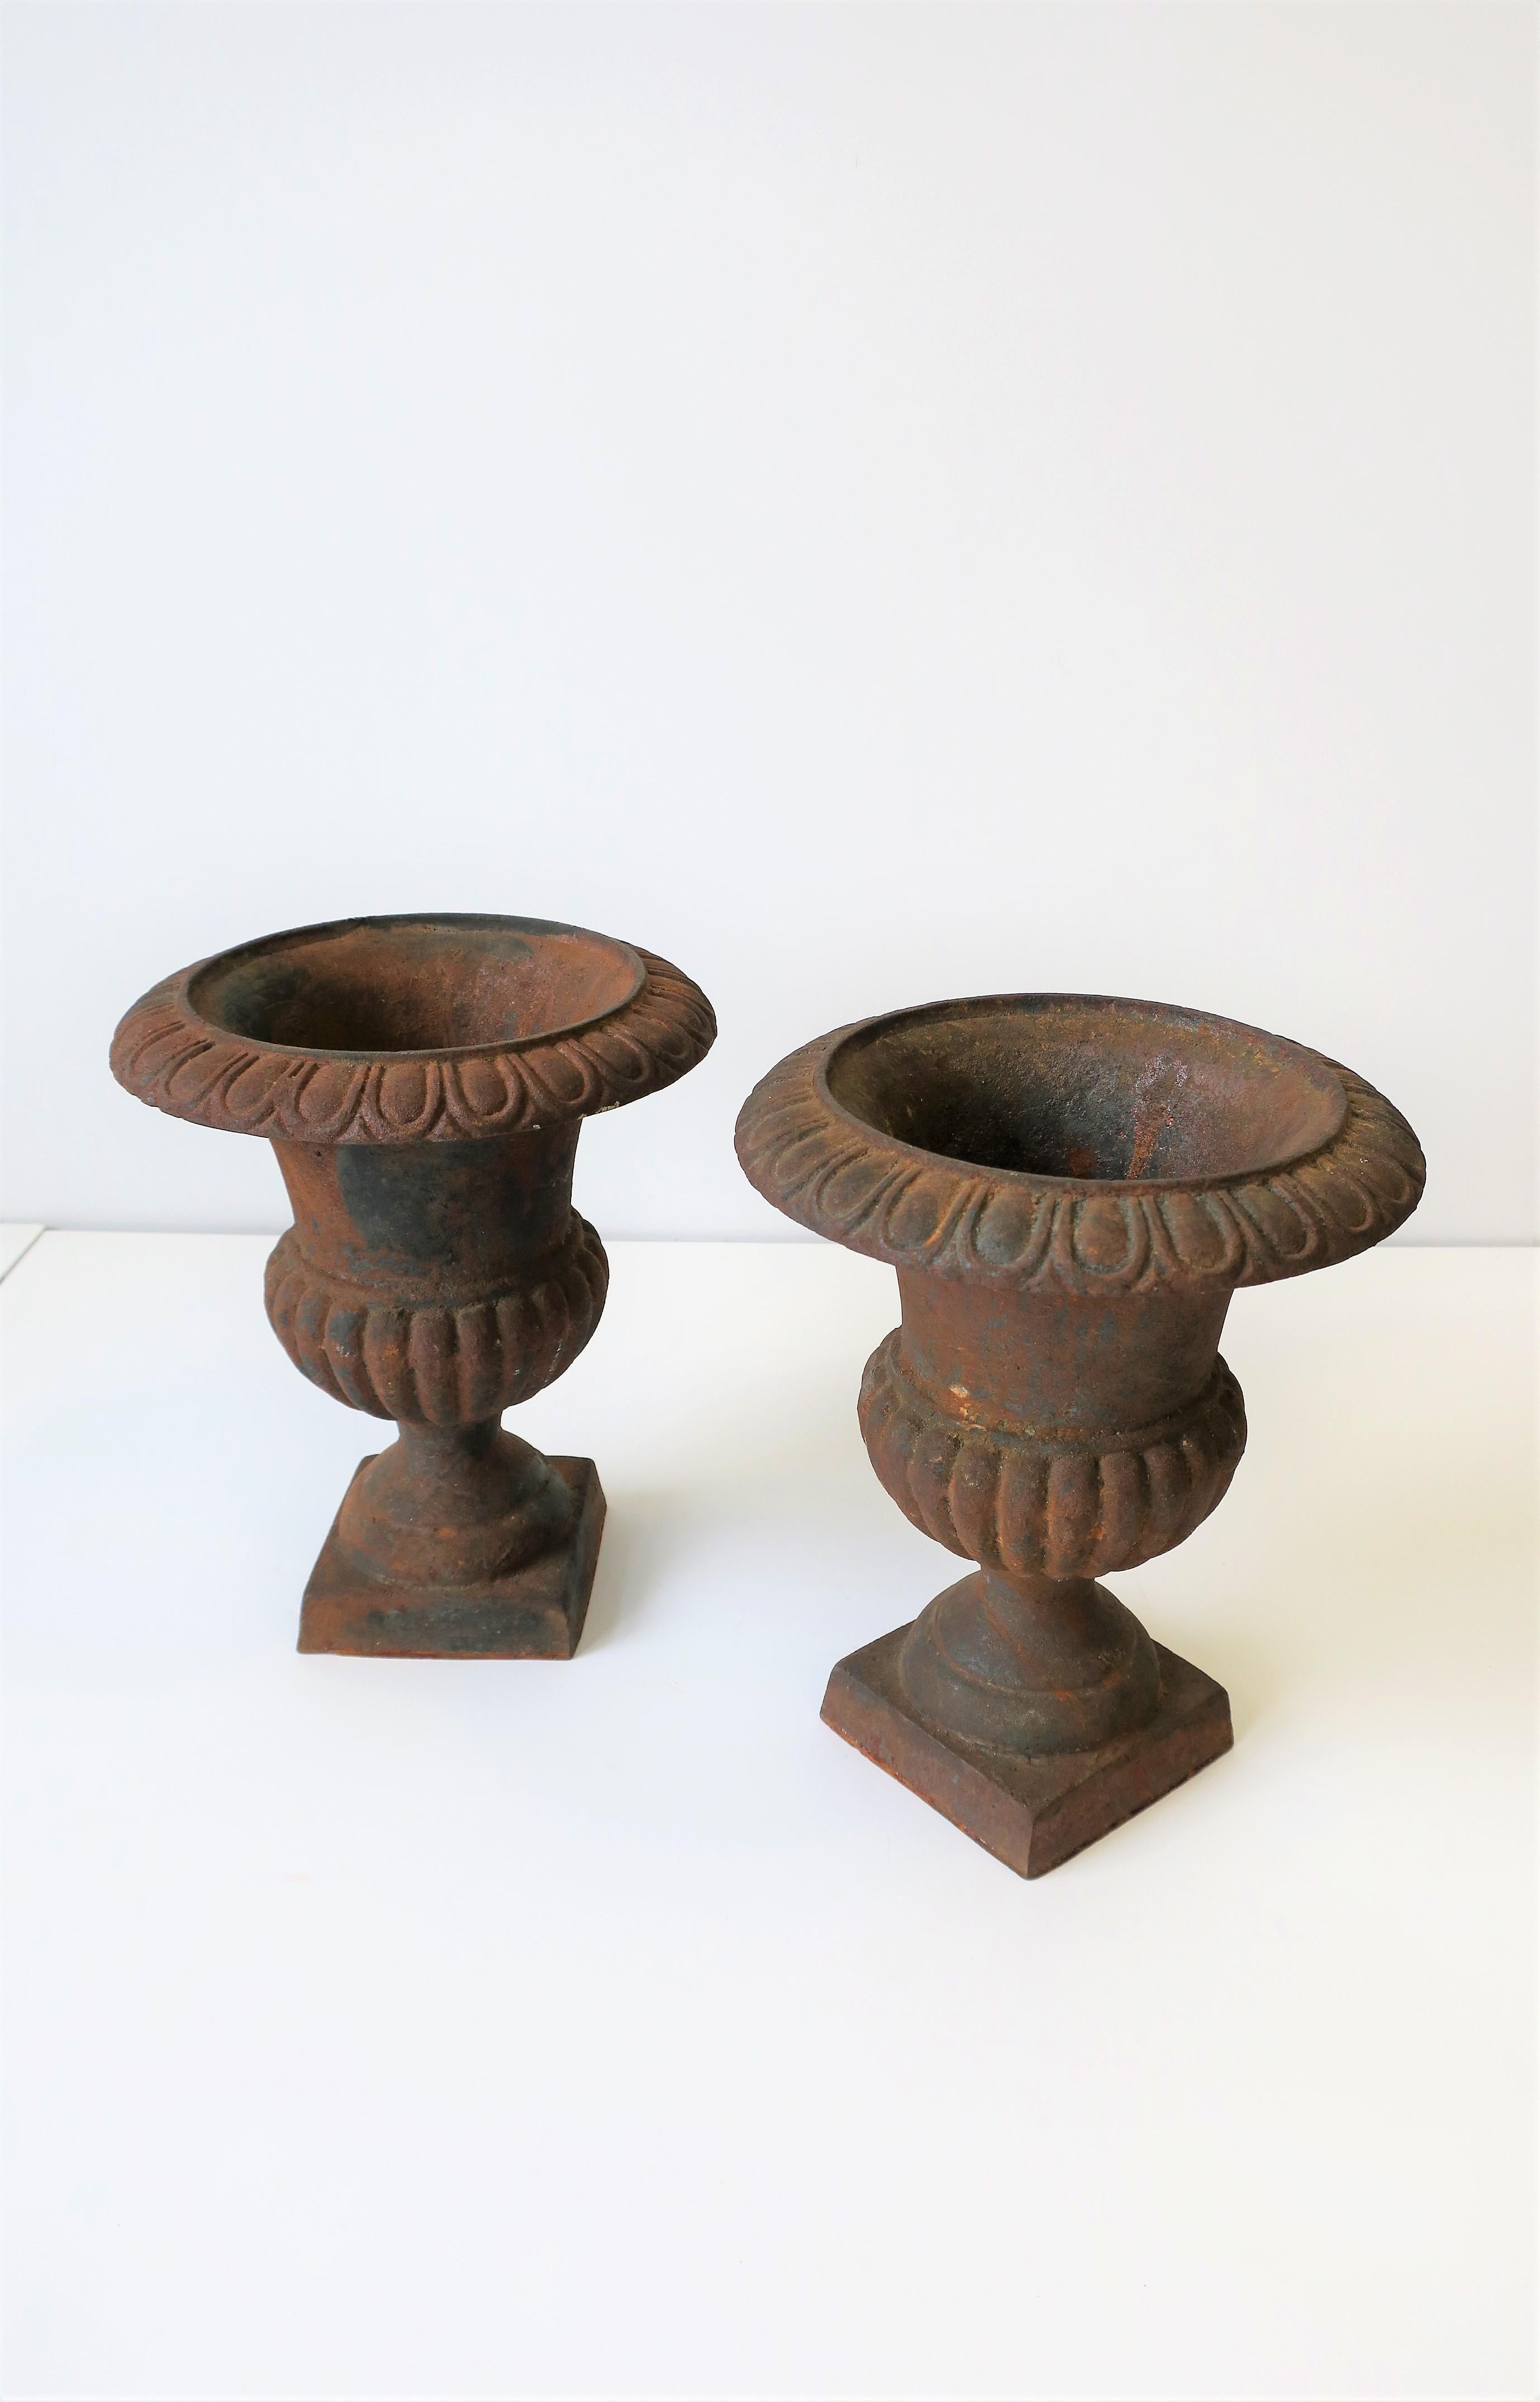 Neoclassical Iron Urns Flower or Plant Planters Jardinières, Pair In Good Condition For Sale In New York, NY